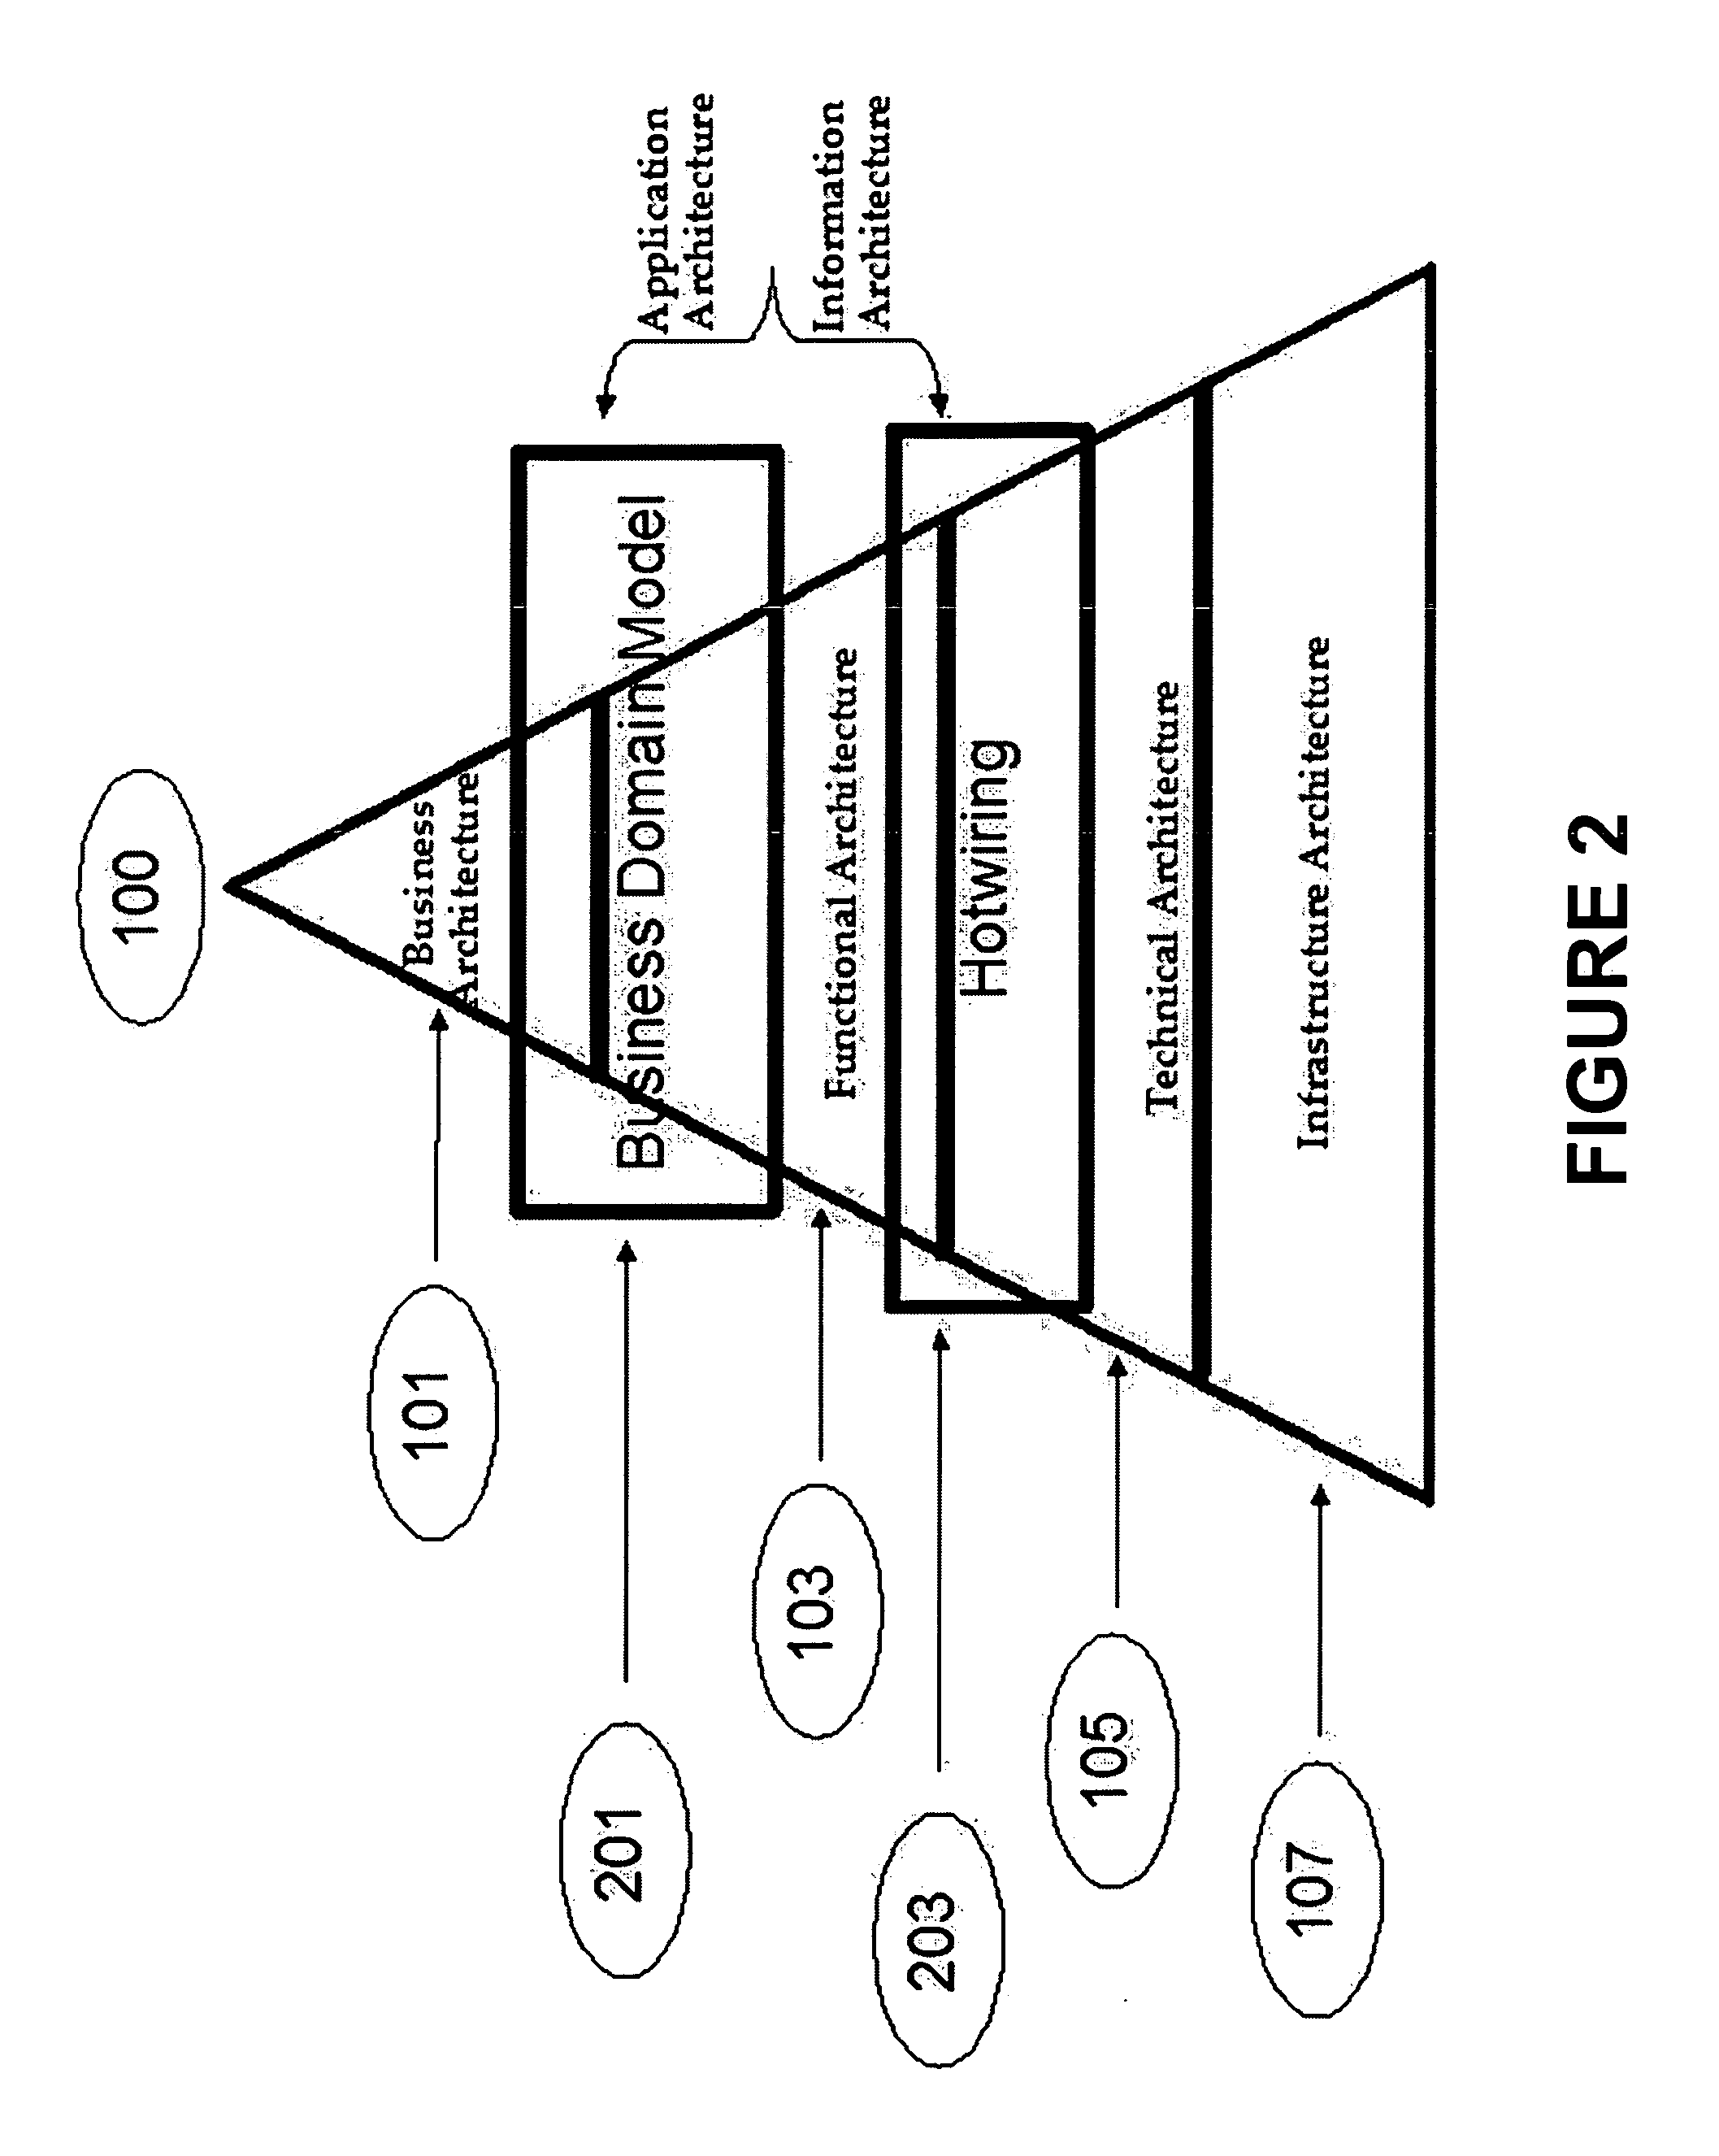 Systems and methods for managing business issues